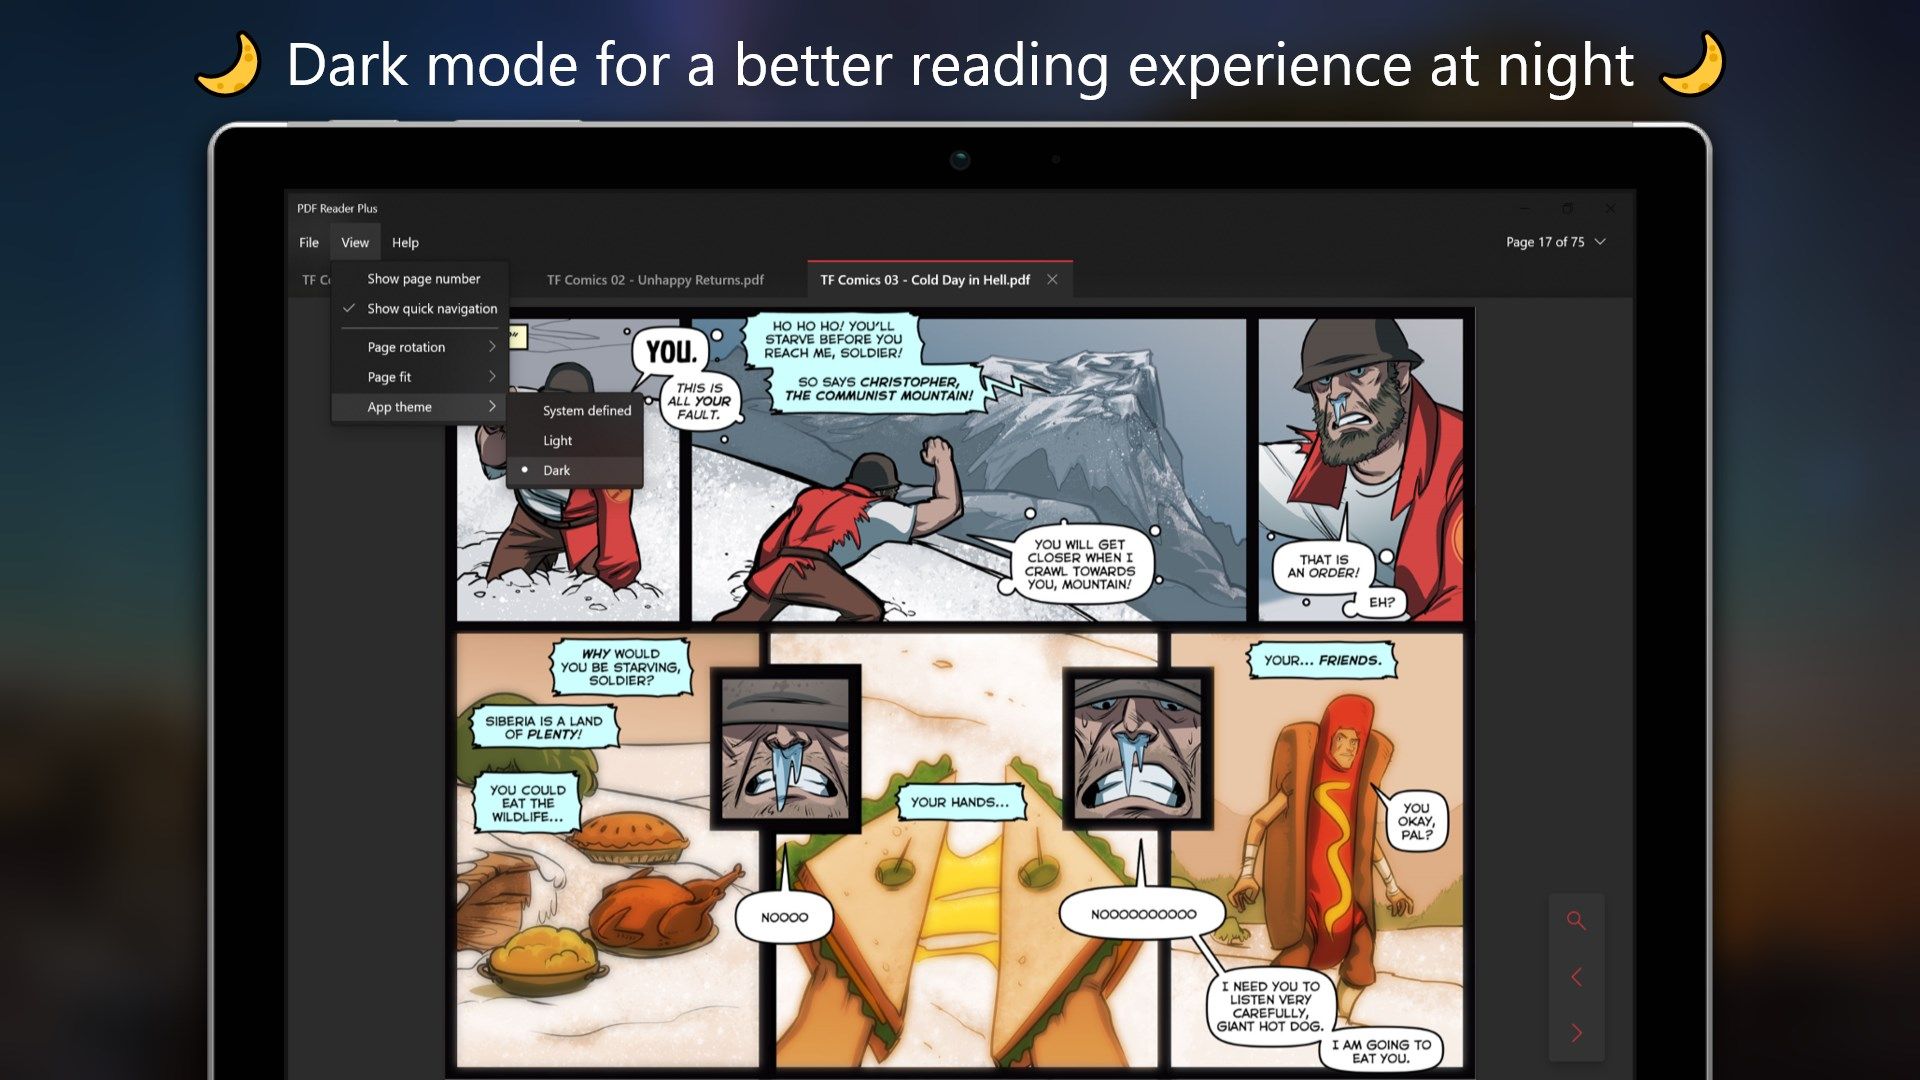 Dark mode for a better reading experience at night